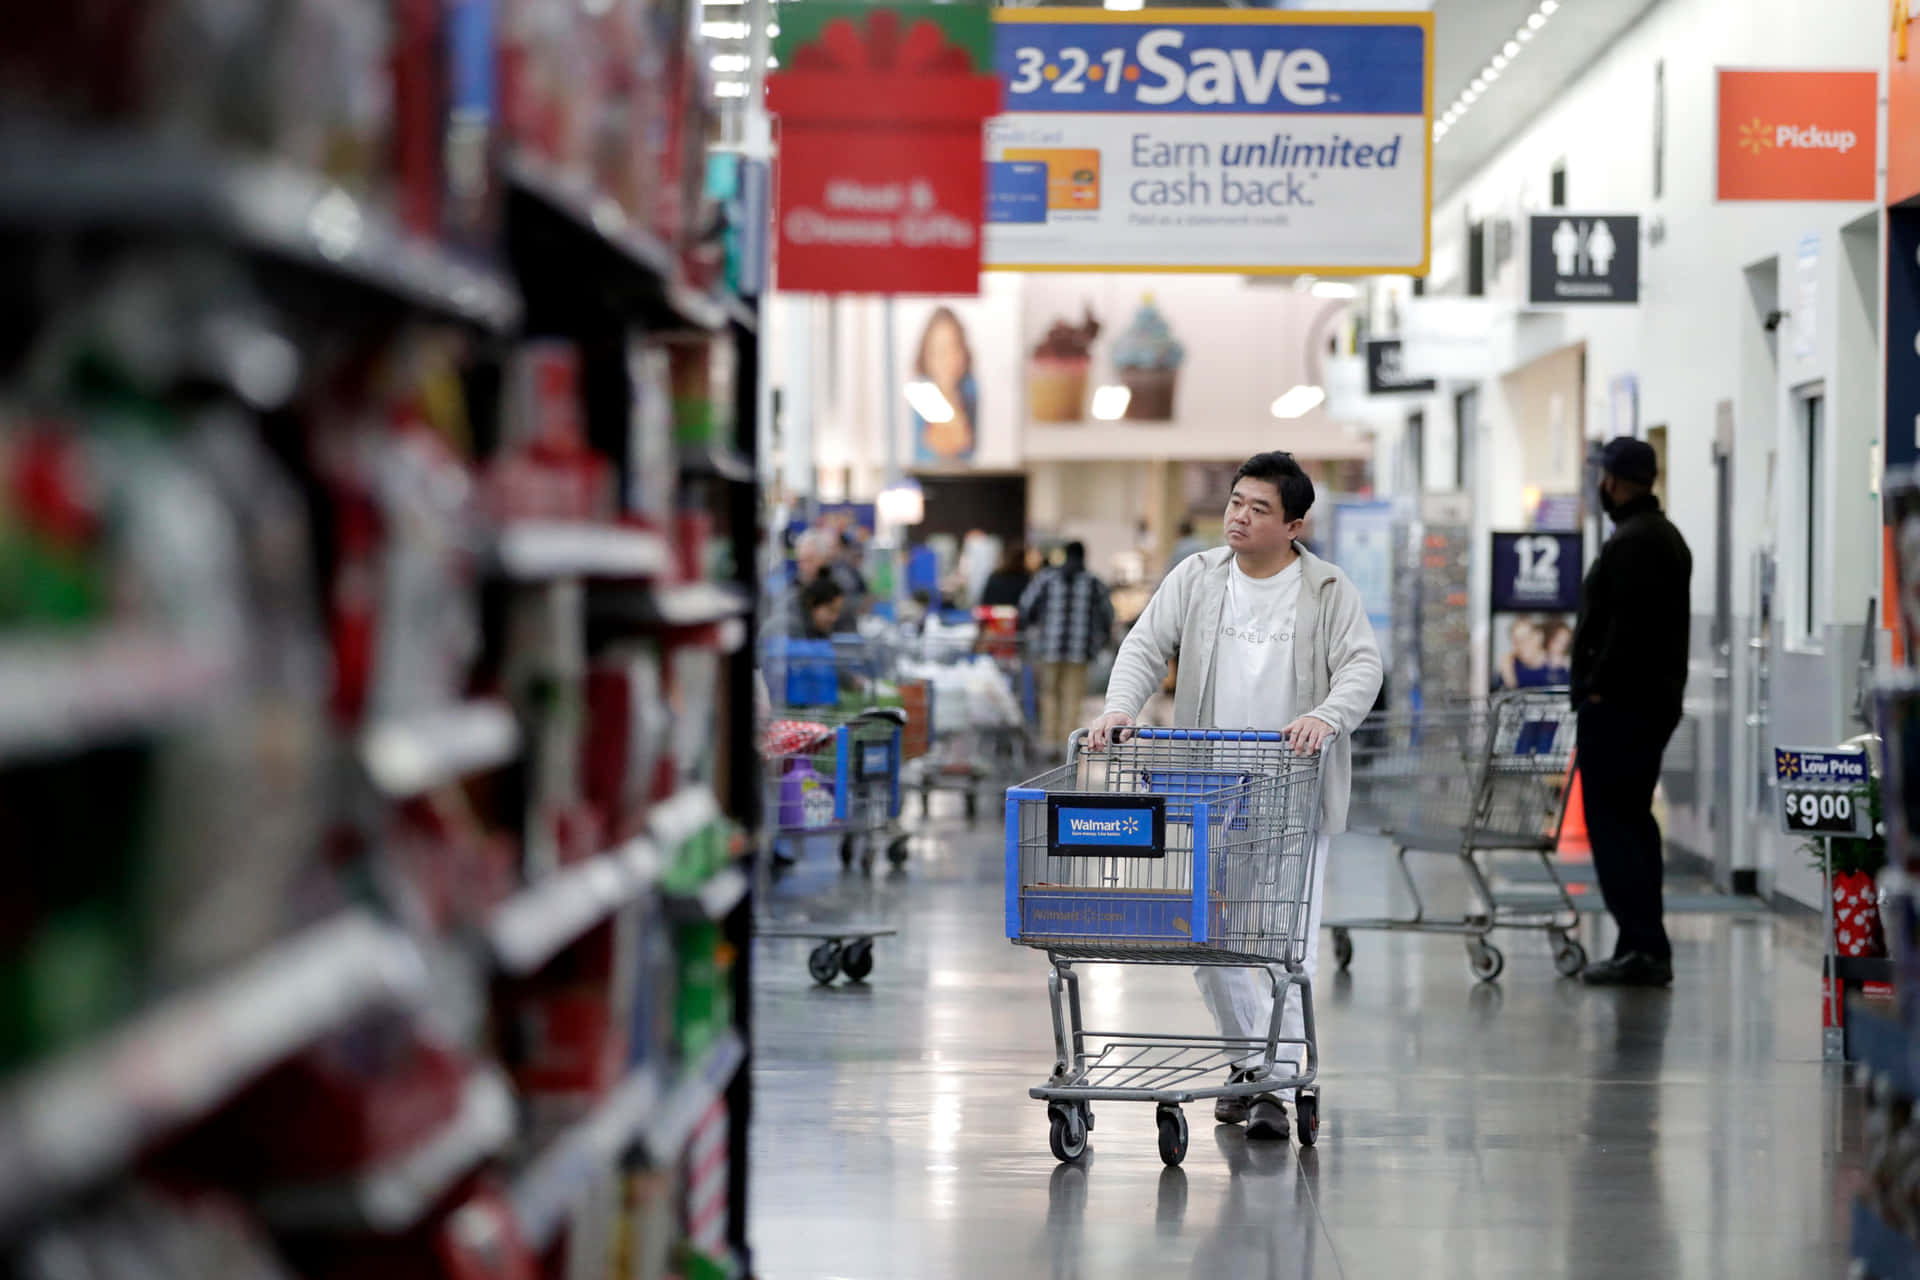 Walmart Shoppers Stocking Up on Supplies